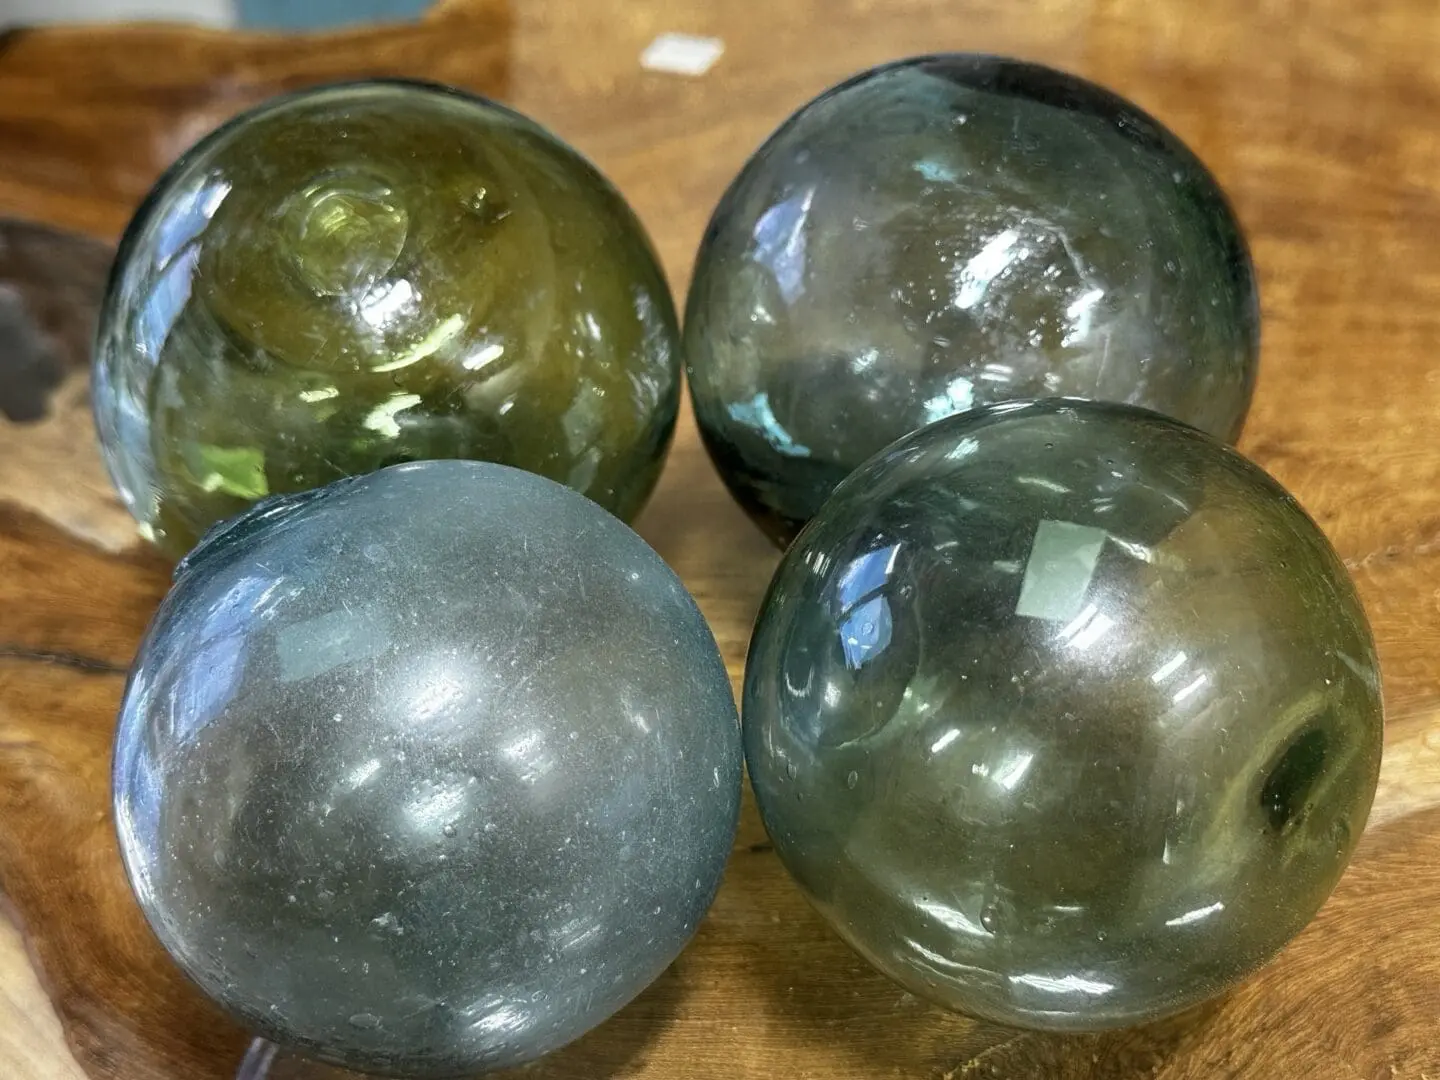 Four glass balls are sitting on a table.